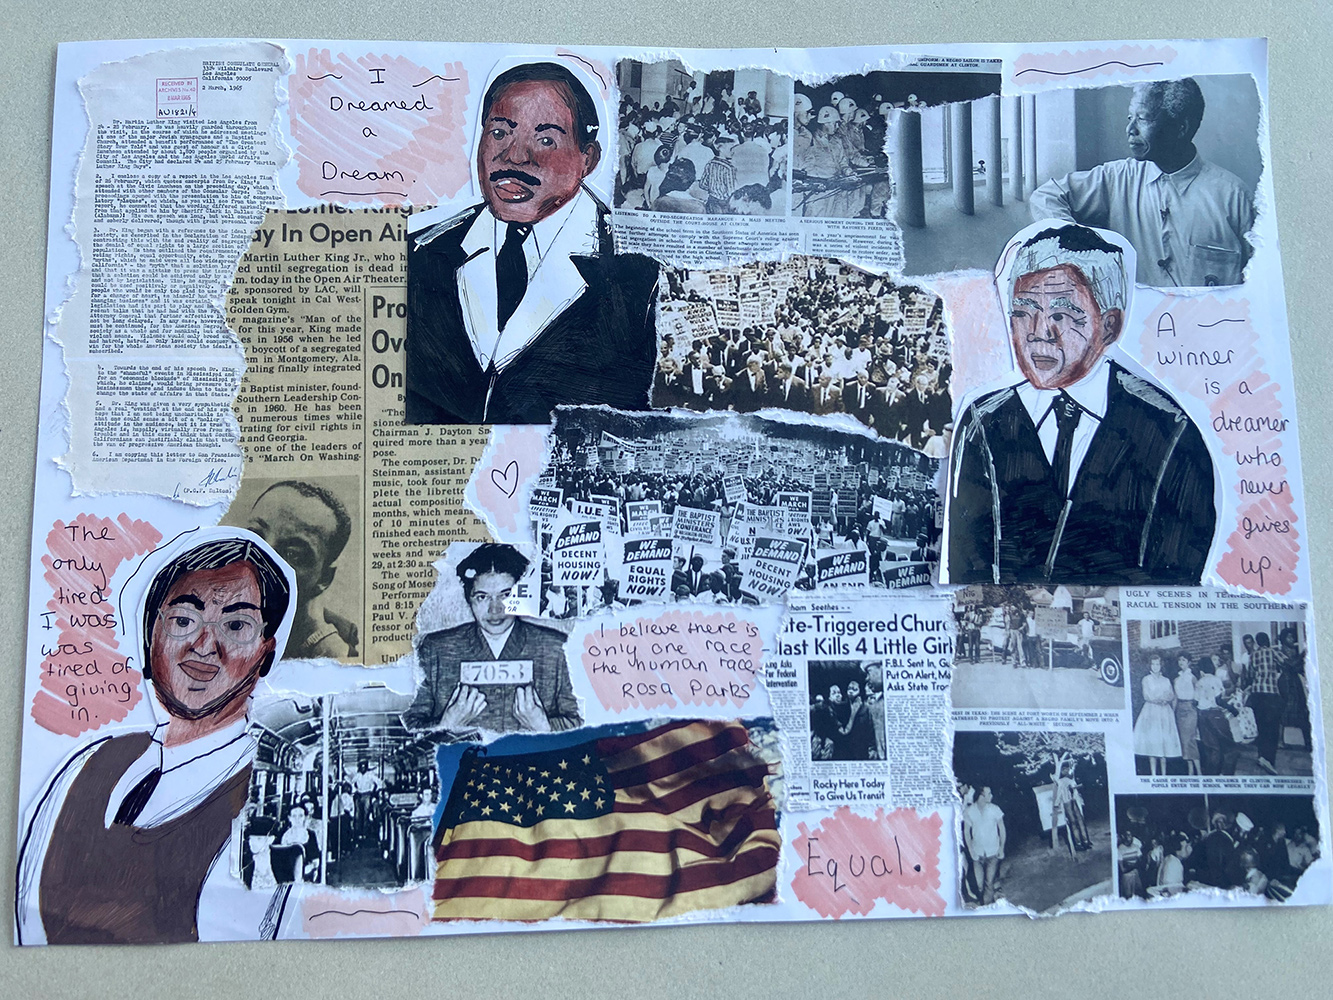 Collage artwork featuring three pencil portraits of historical Black figures interspersed with newspaper clippings and images.